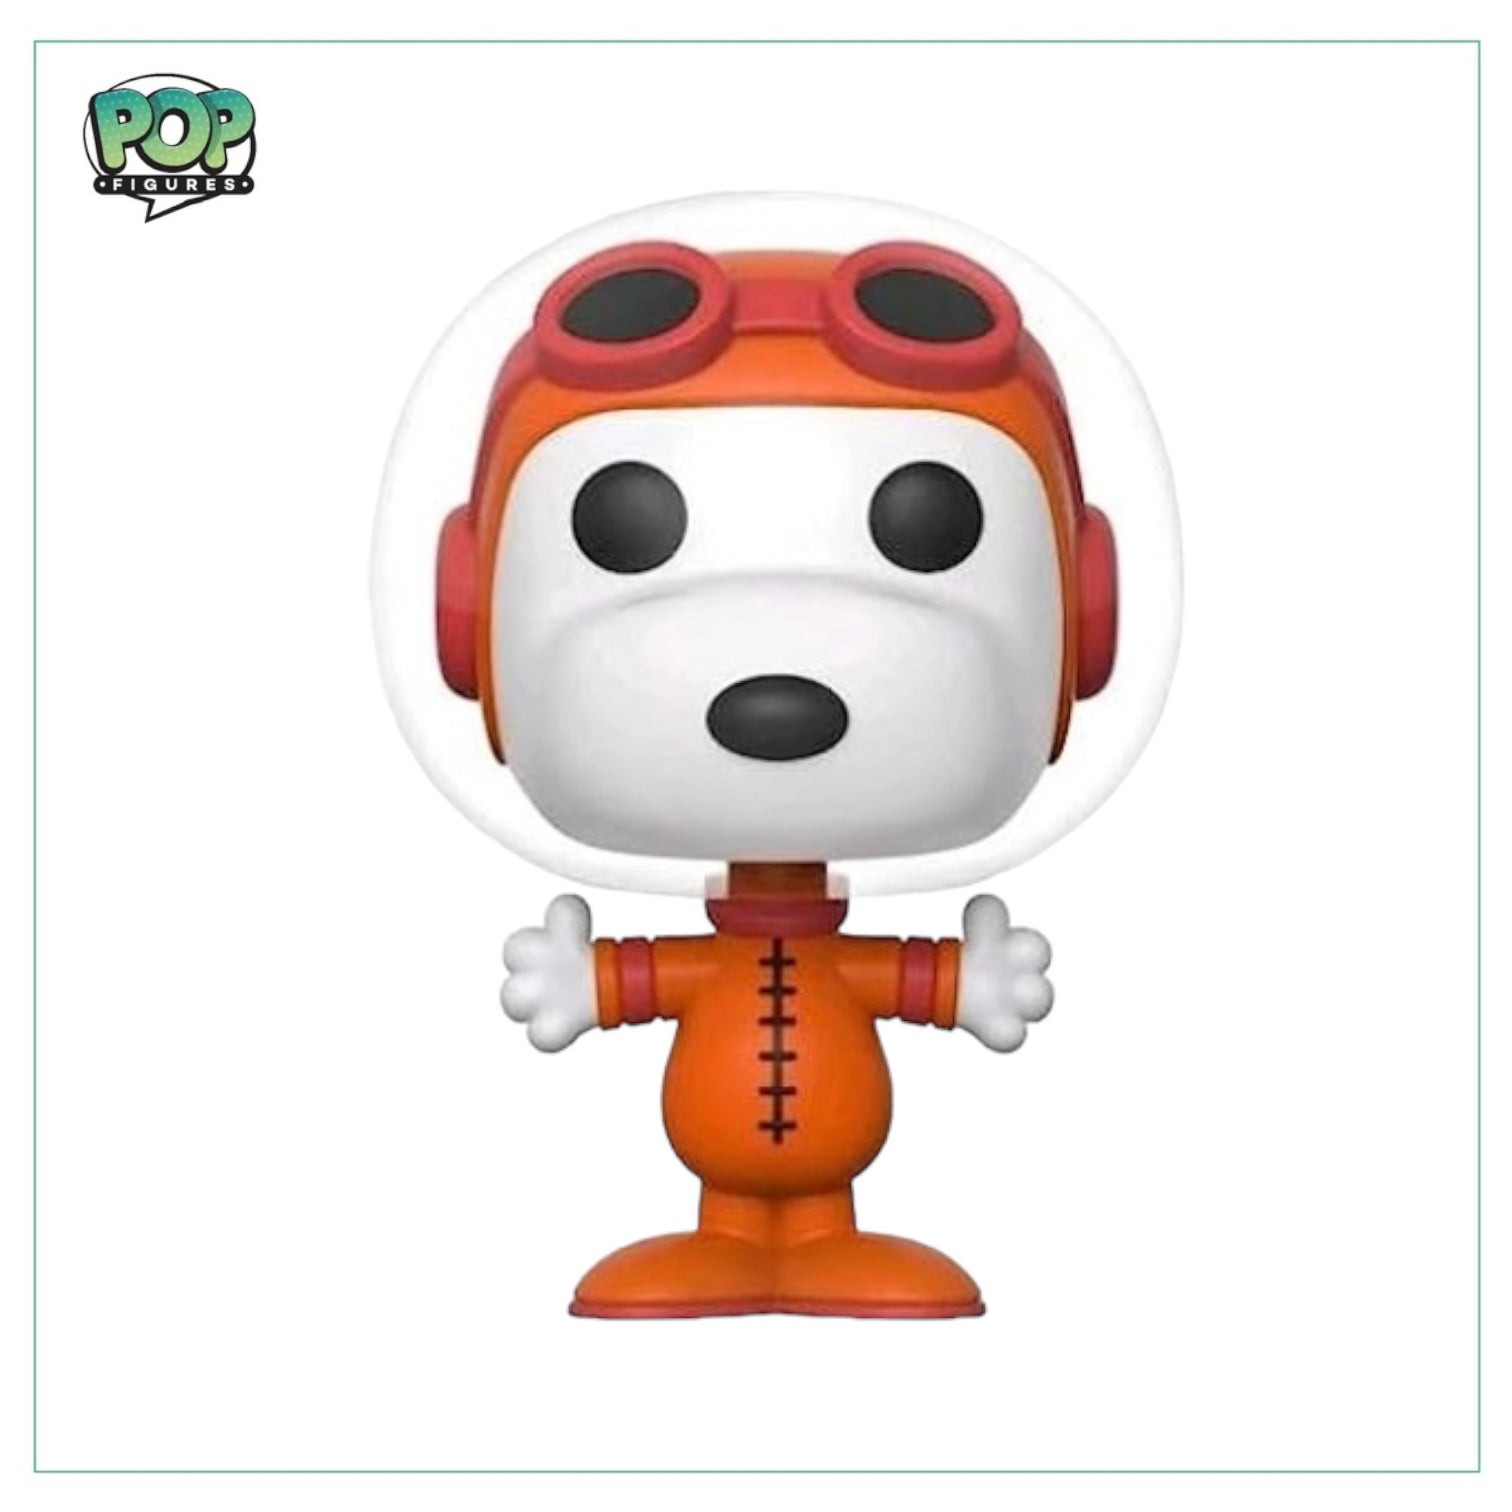 Astronaut Snoopy #577 Funko Pop! - Peanuts - 2019 SDCC Limited Edition Exclusive